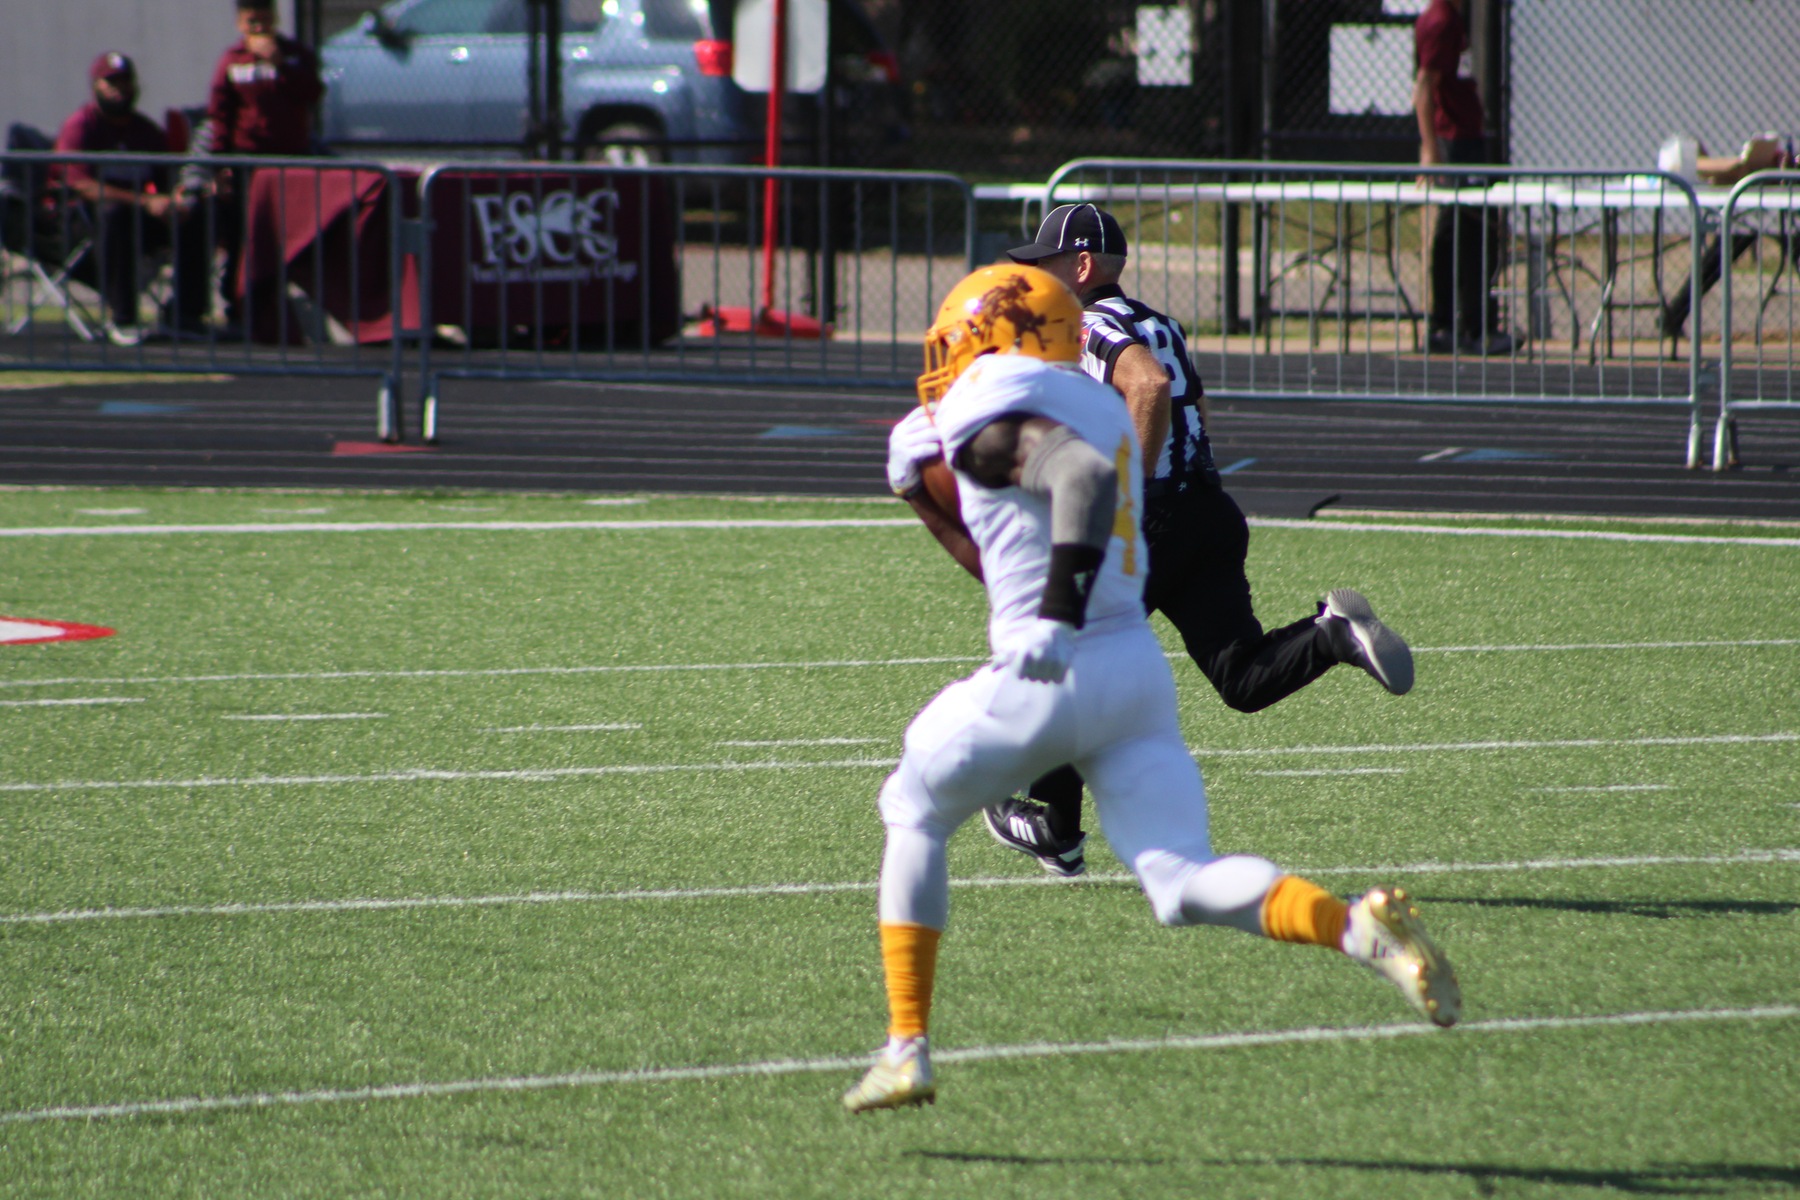 West named KJCCC Offensive Player of the Week